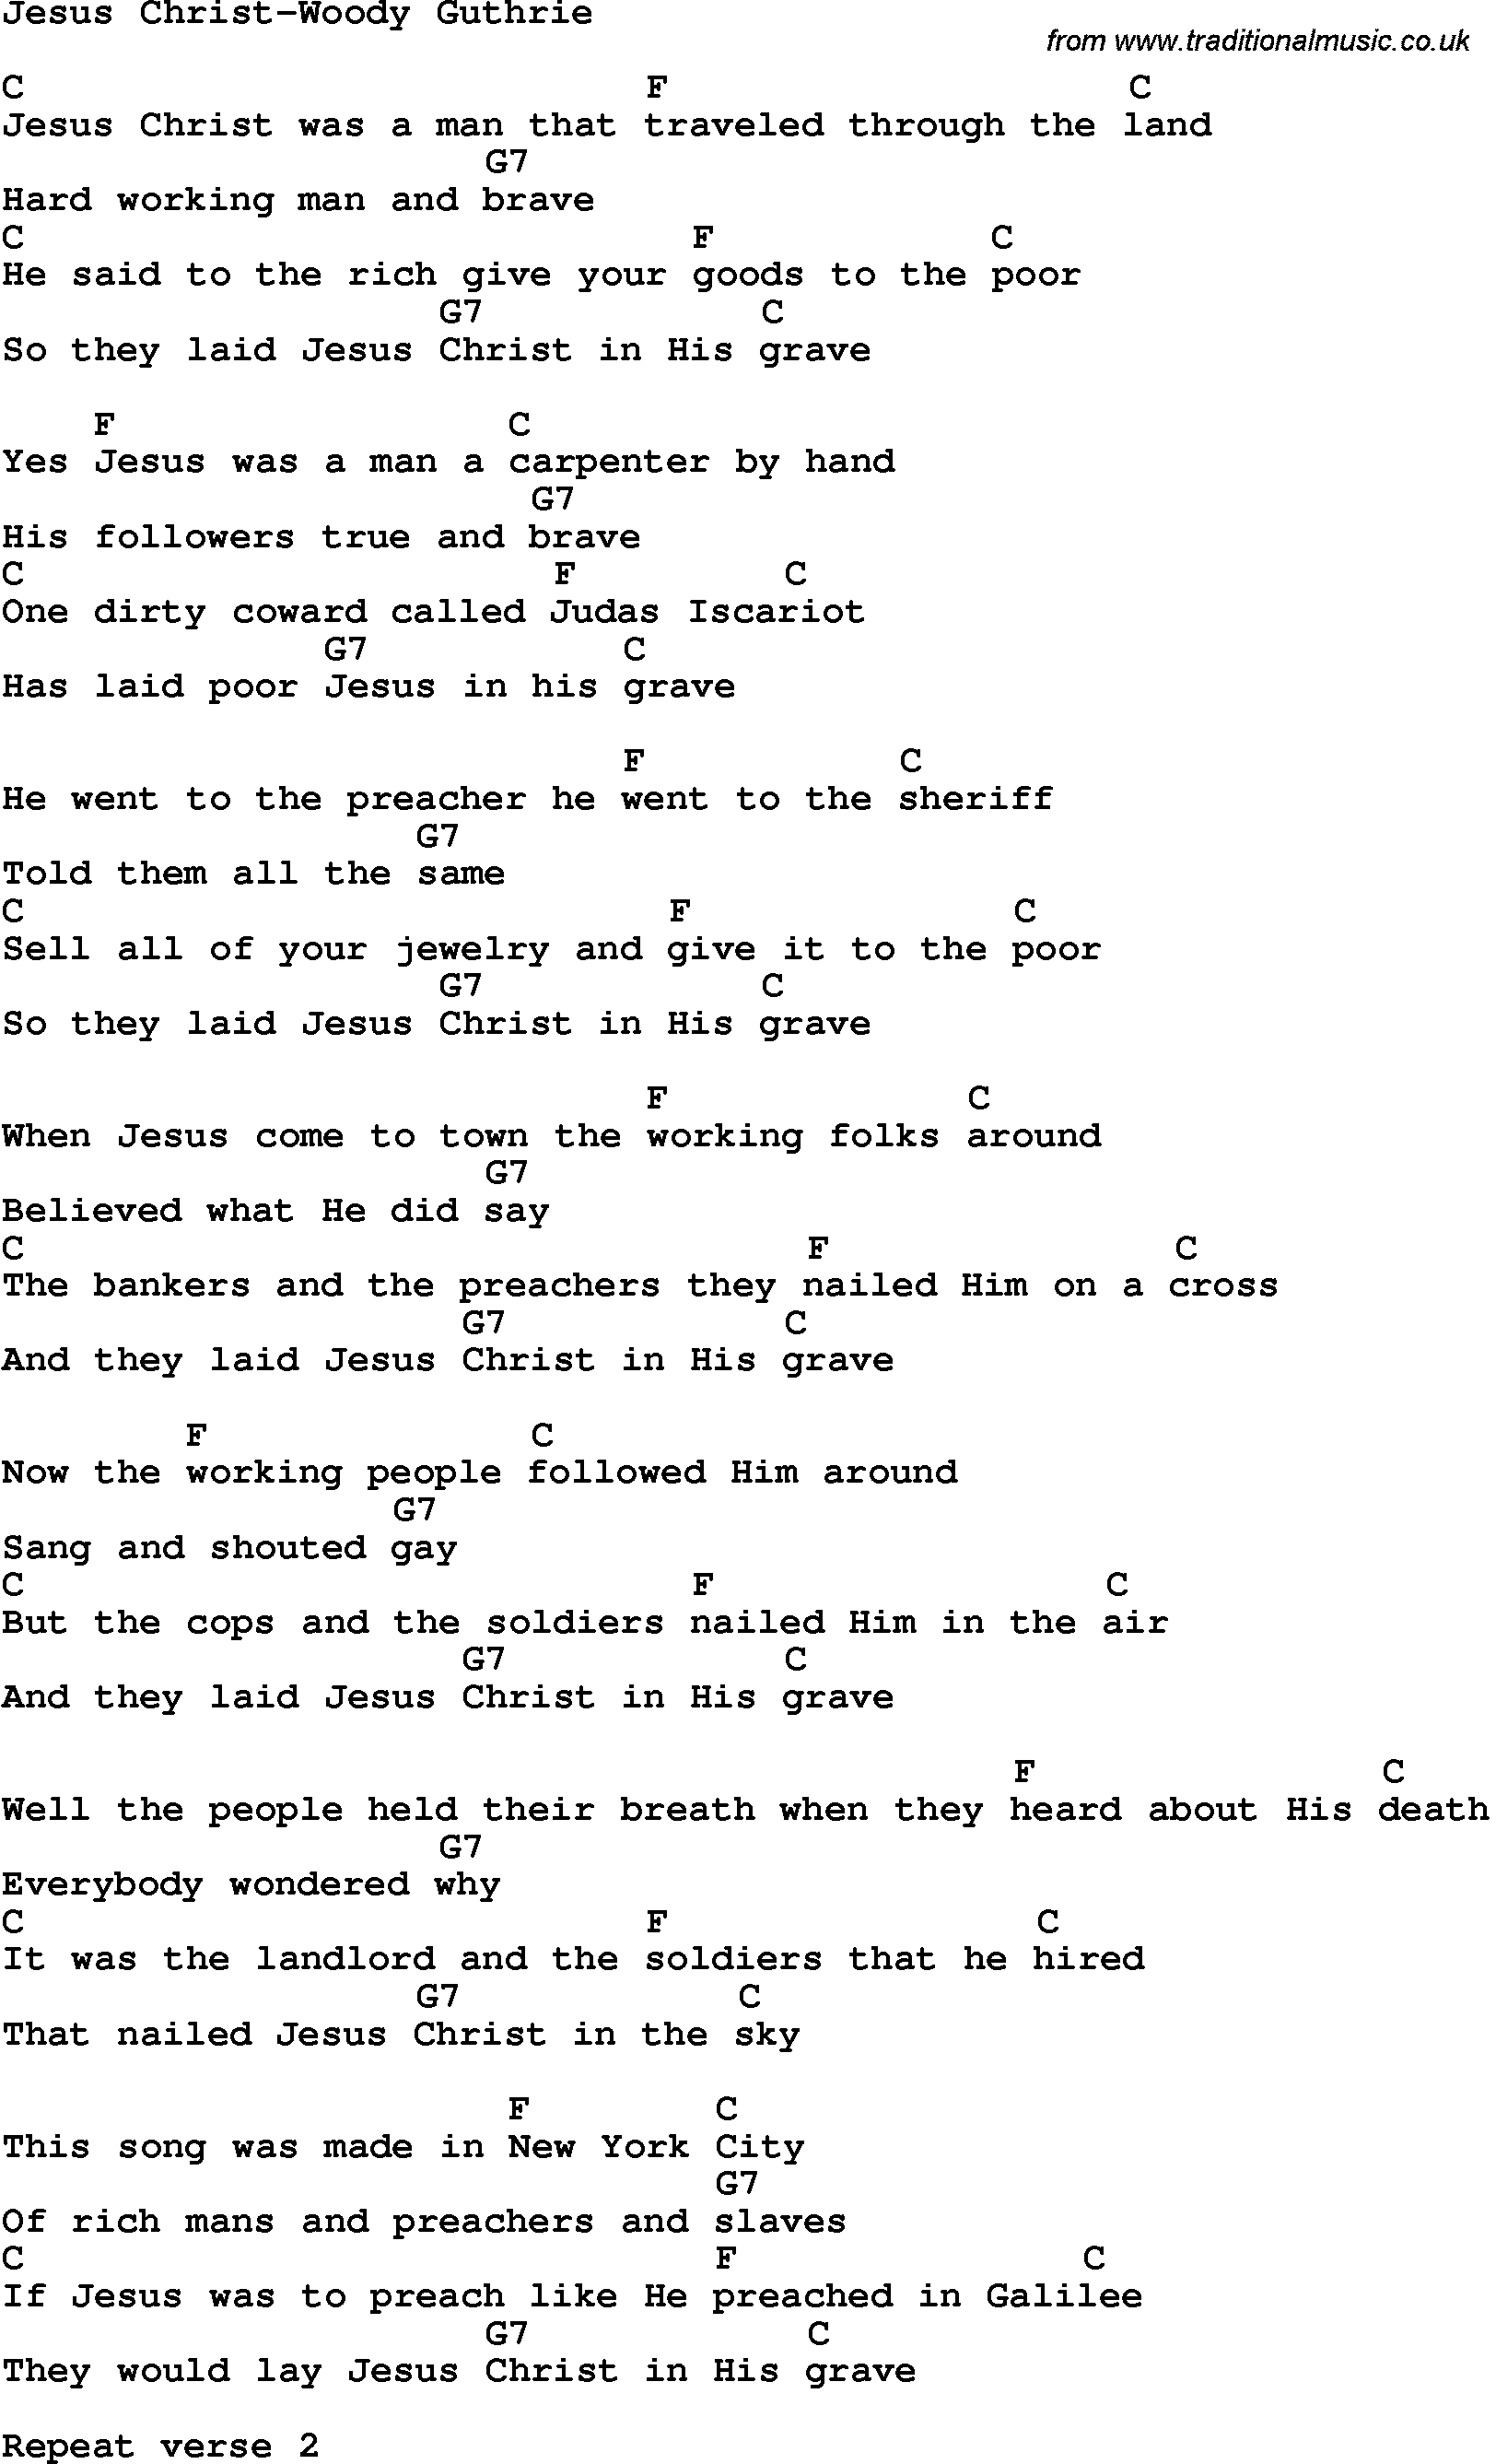 Country, Southern and Bluegrass Gospel Song Jesus Christ-Woody Guthrie lyrics and chords